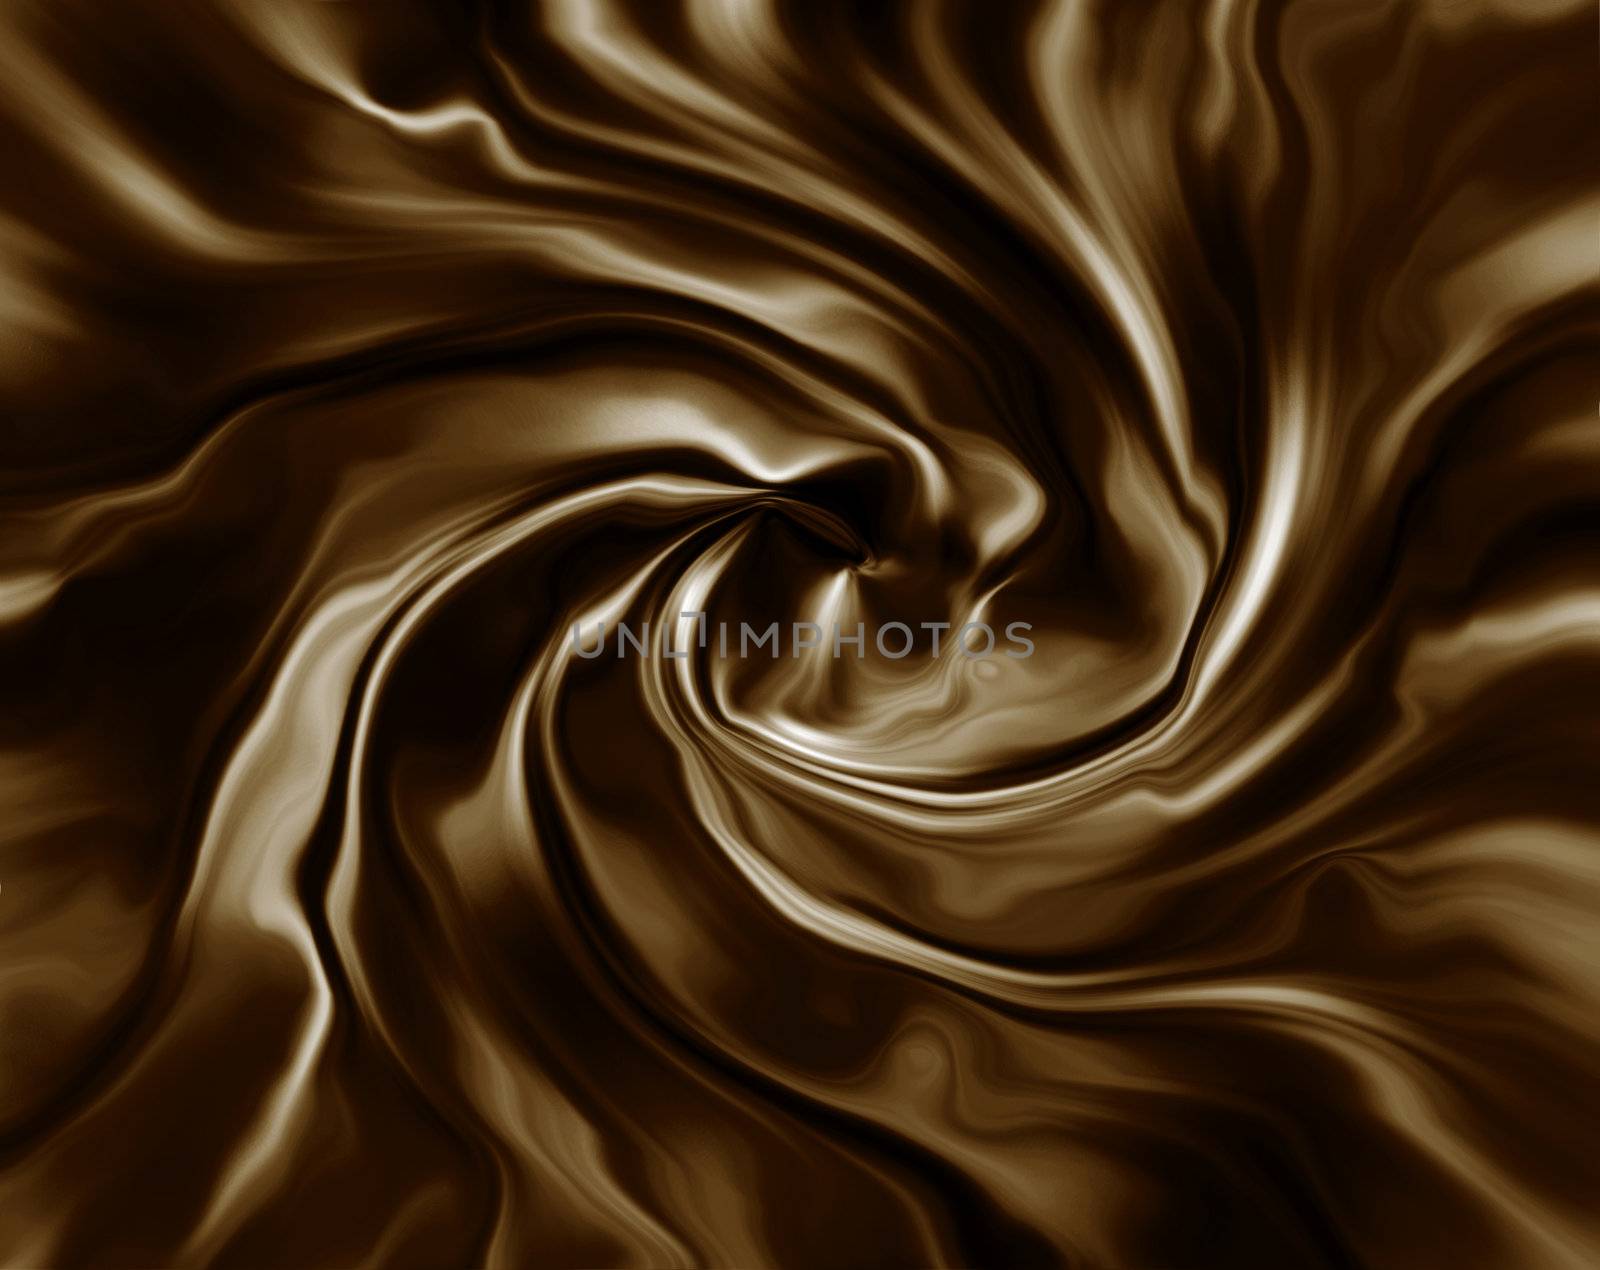 Illustration of a desirable abstract chocolat